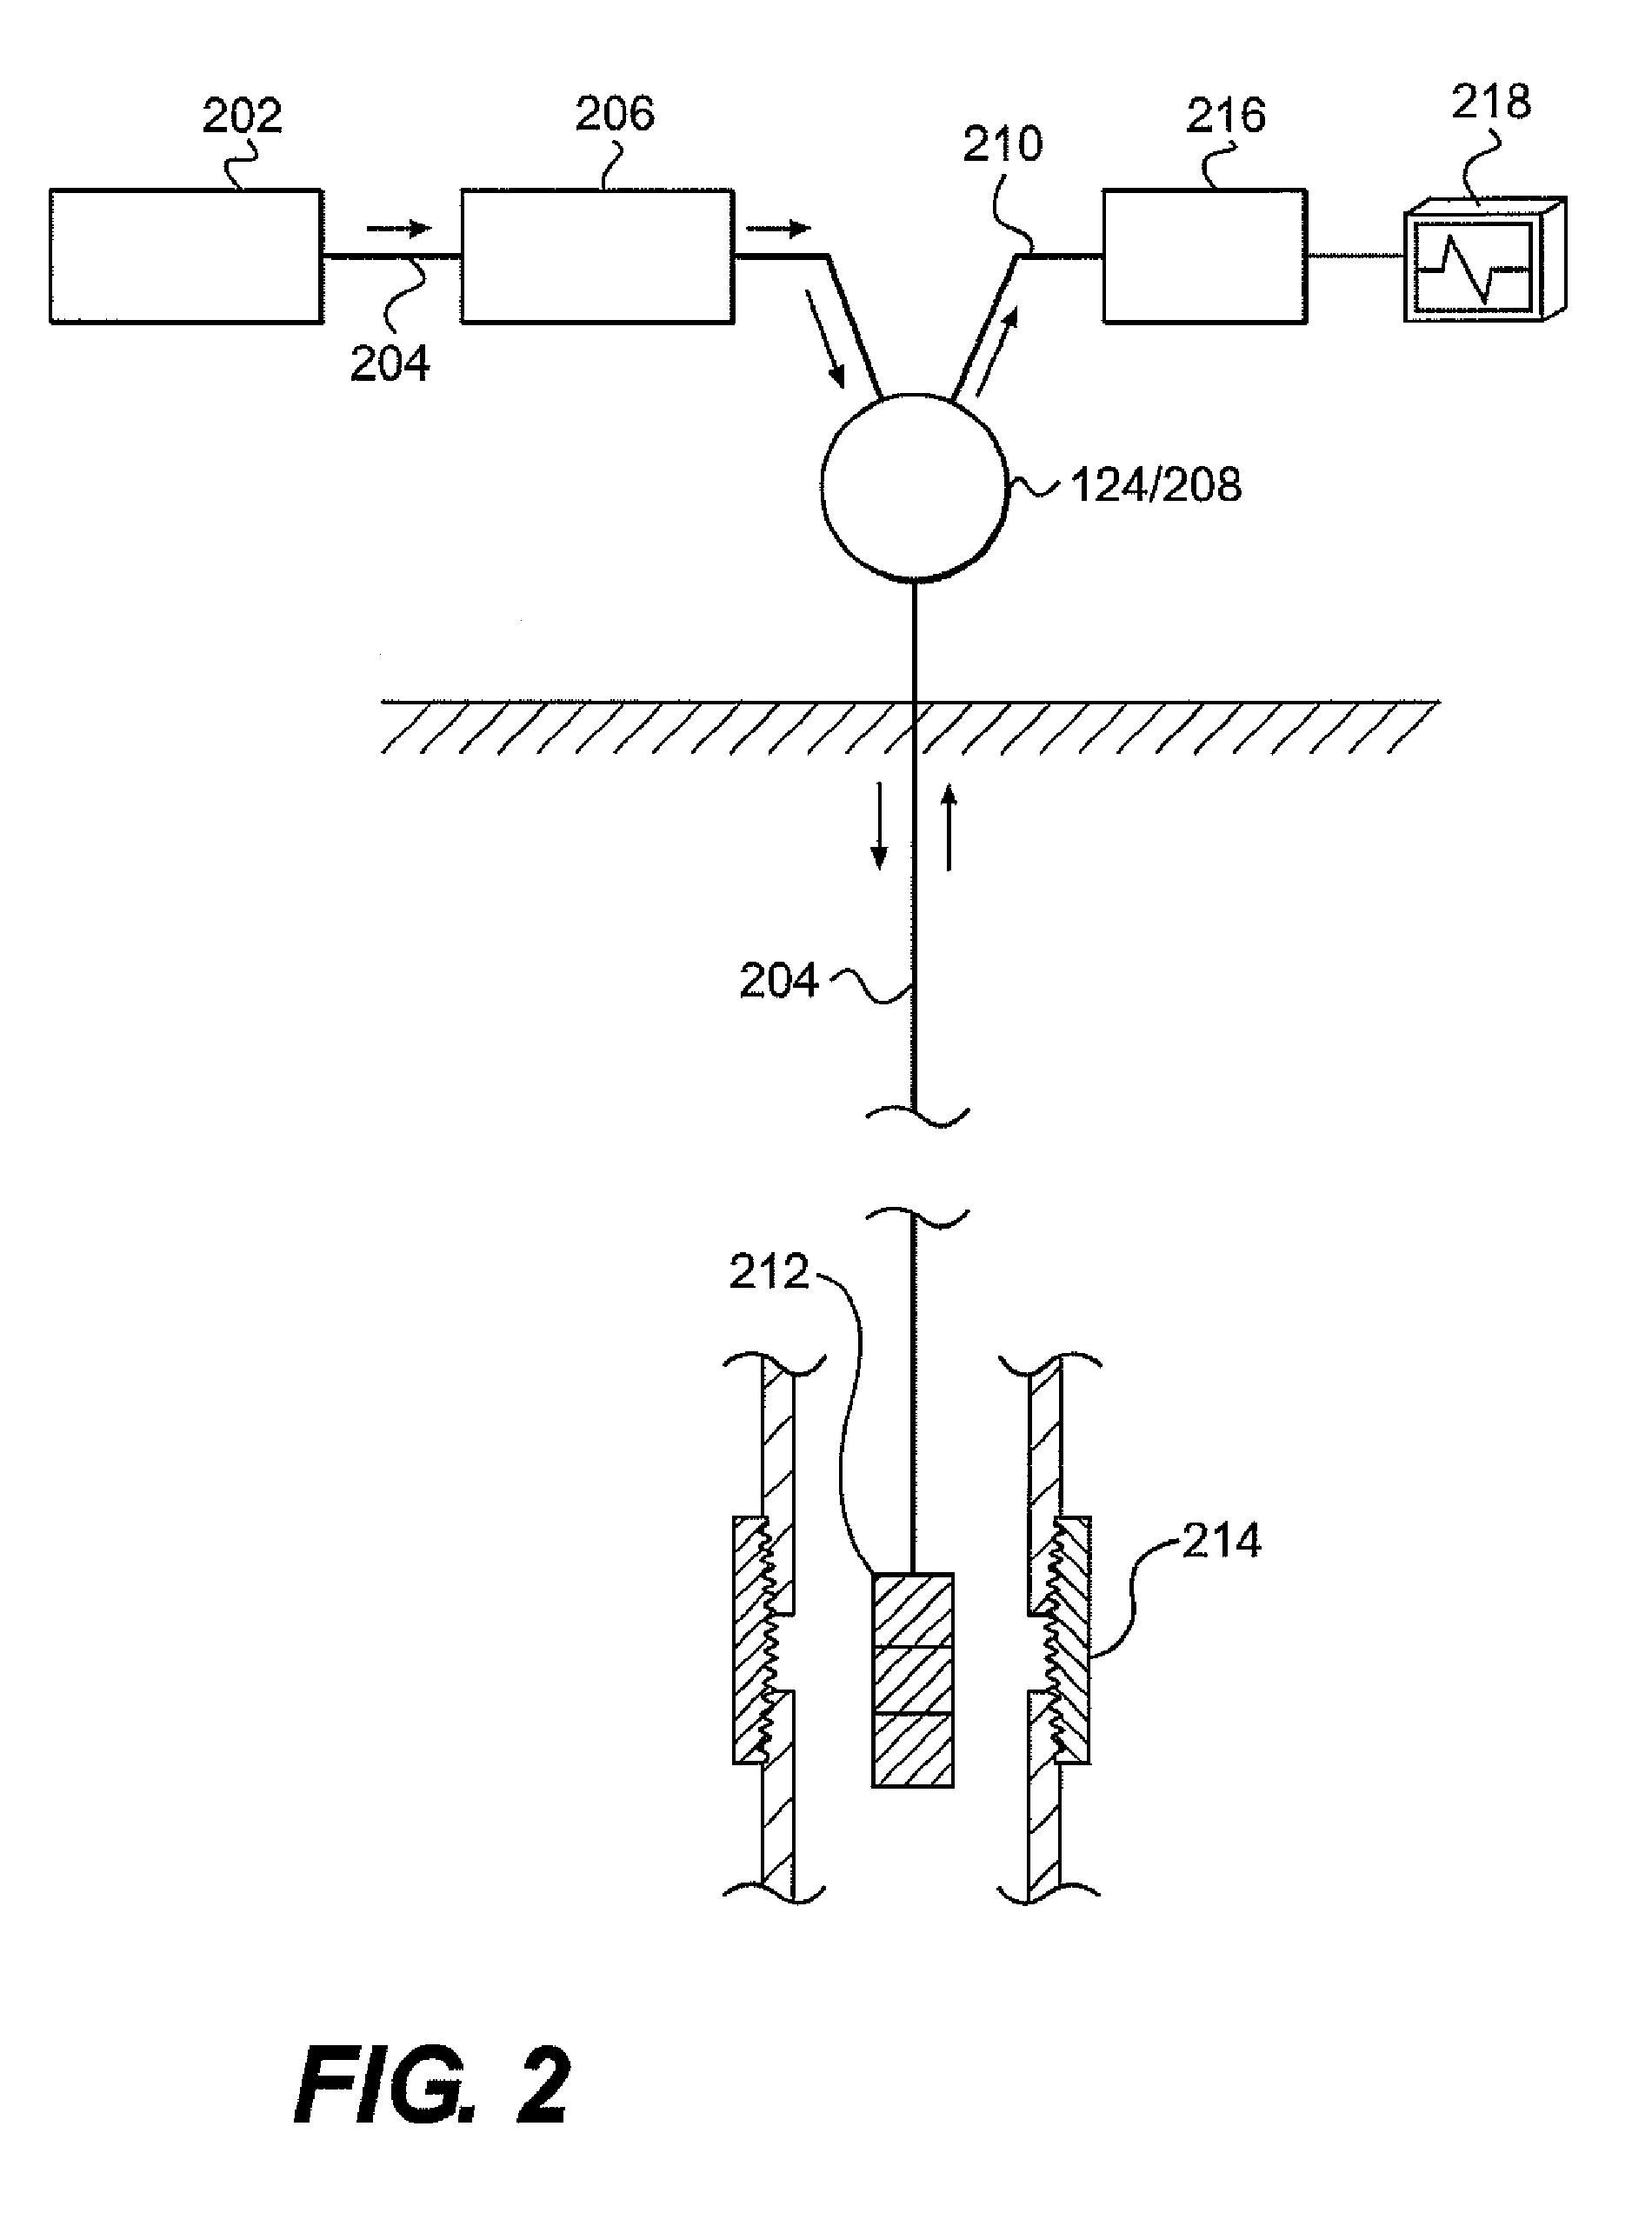 Optical fiber system and method for wellhole sensing of magnetic permeability using diffraction effect of faraday rotator